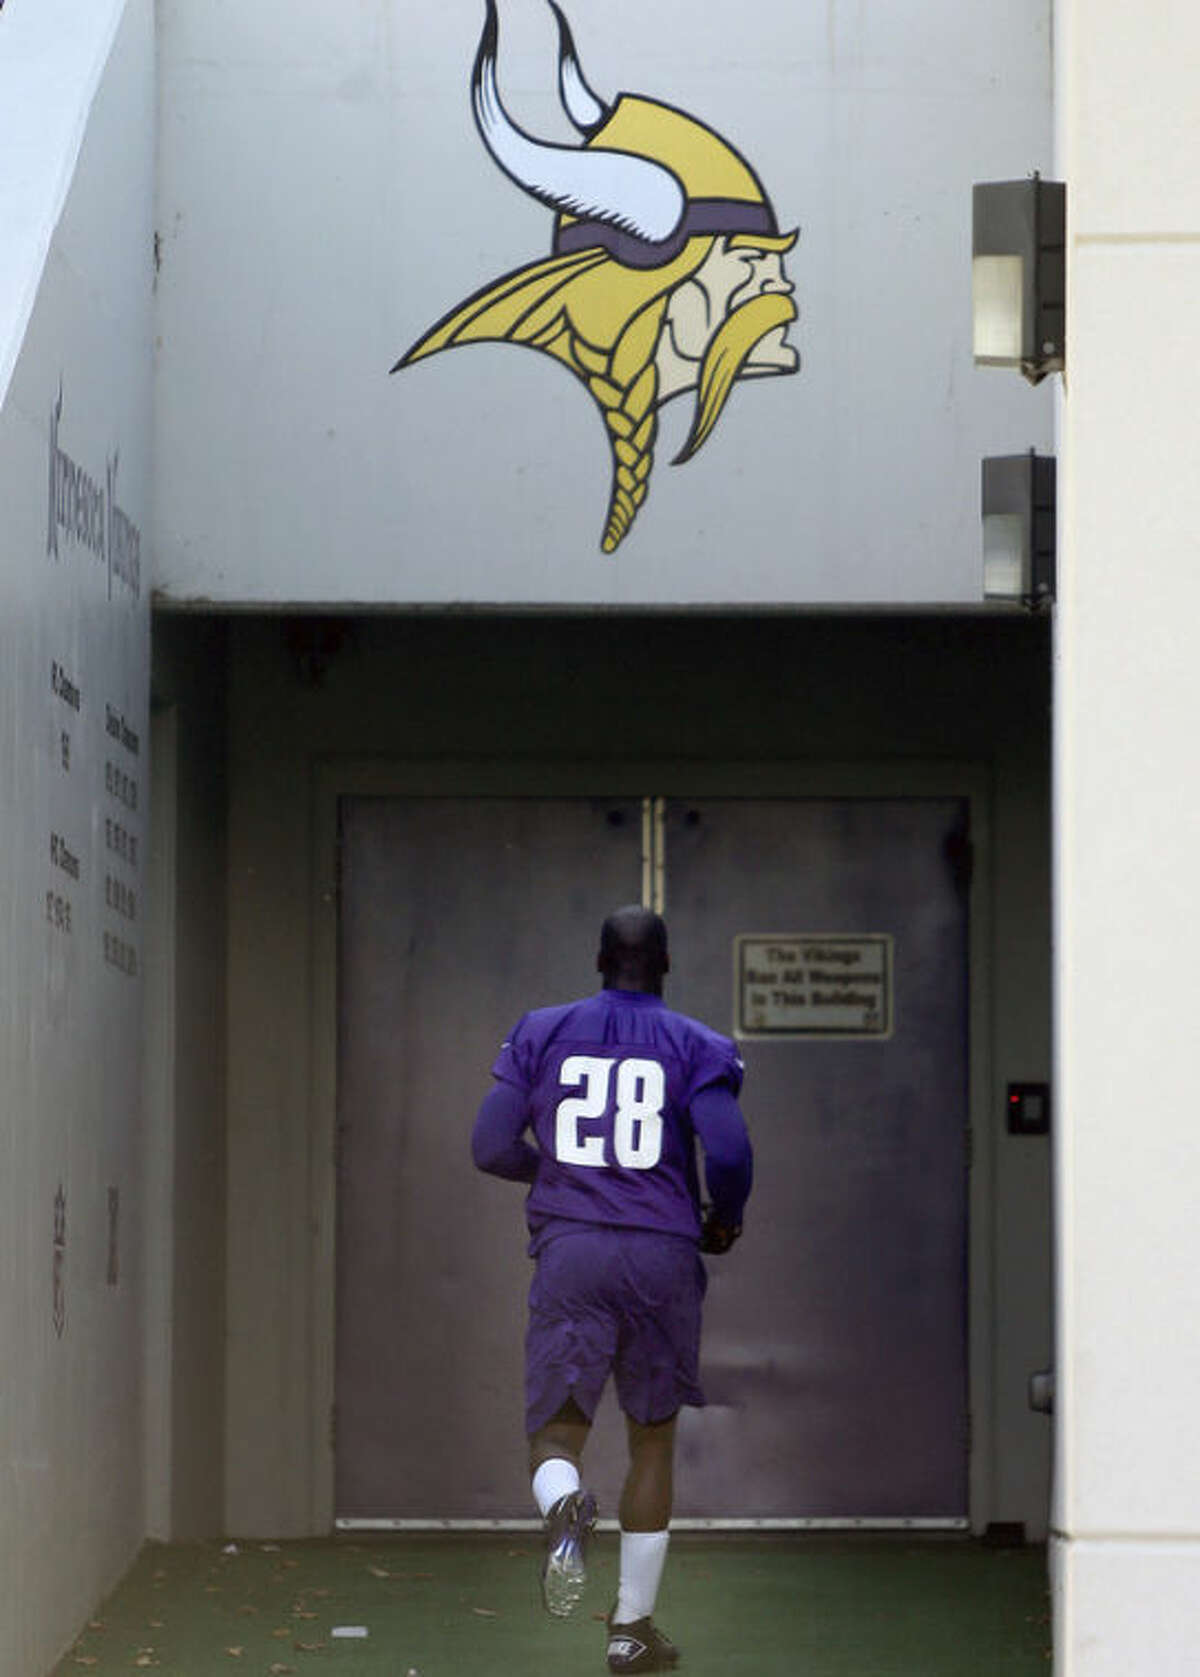 Minnesota Vikings' Adrian Peterson makes his way off an NFL football practice field at Winter Park in Eden Prairie, Minn., Friday, Oct. 11, 2013. Peterson said he is certain he will play Sunday despite a serious personal matter that caused him to miss practice earlier this week. (AP Photo/The Star Tribune, Elizabeth Flores) ST. PAUL PIONEER PRESS OUT; SOFT OUT MINNEAPOLIS-AREA TV NOT TV OUT; MAGAZINES OUT